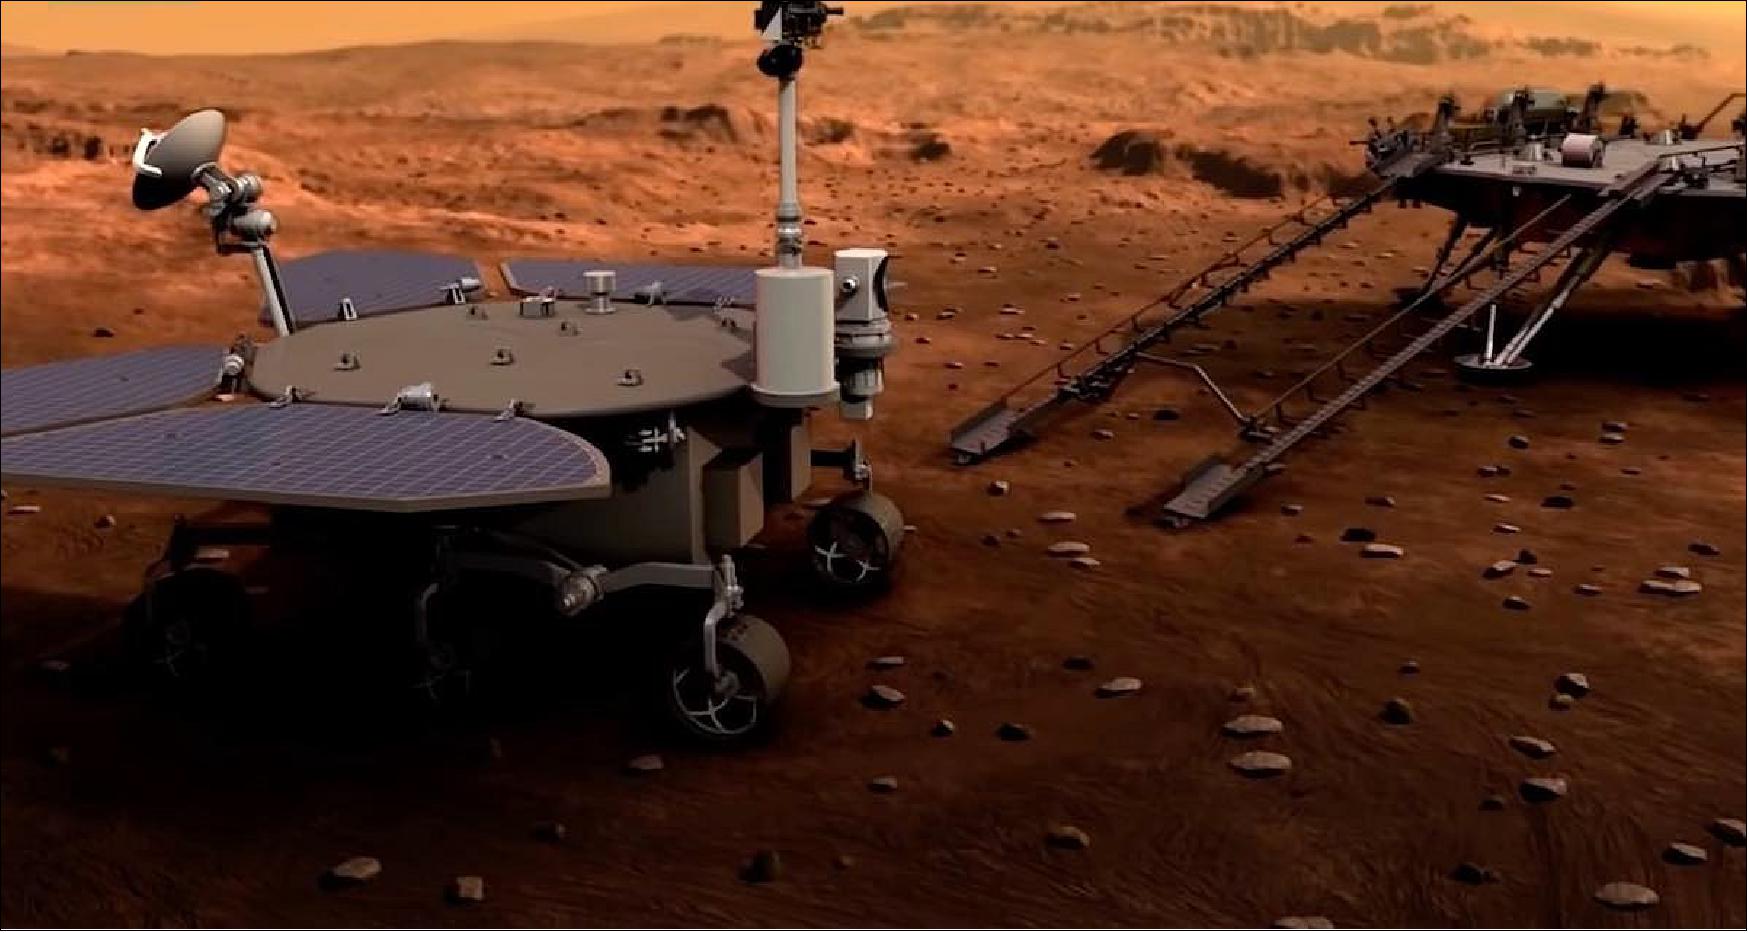 Figure 22: If all goes according to plan, the Zhurong rover will exit the landing platform down a ramp to begin driving around the unexplored landing site (image credit: CNSA, Spaceflight Now)